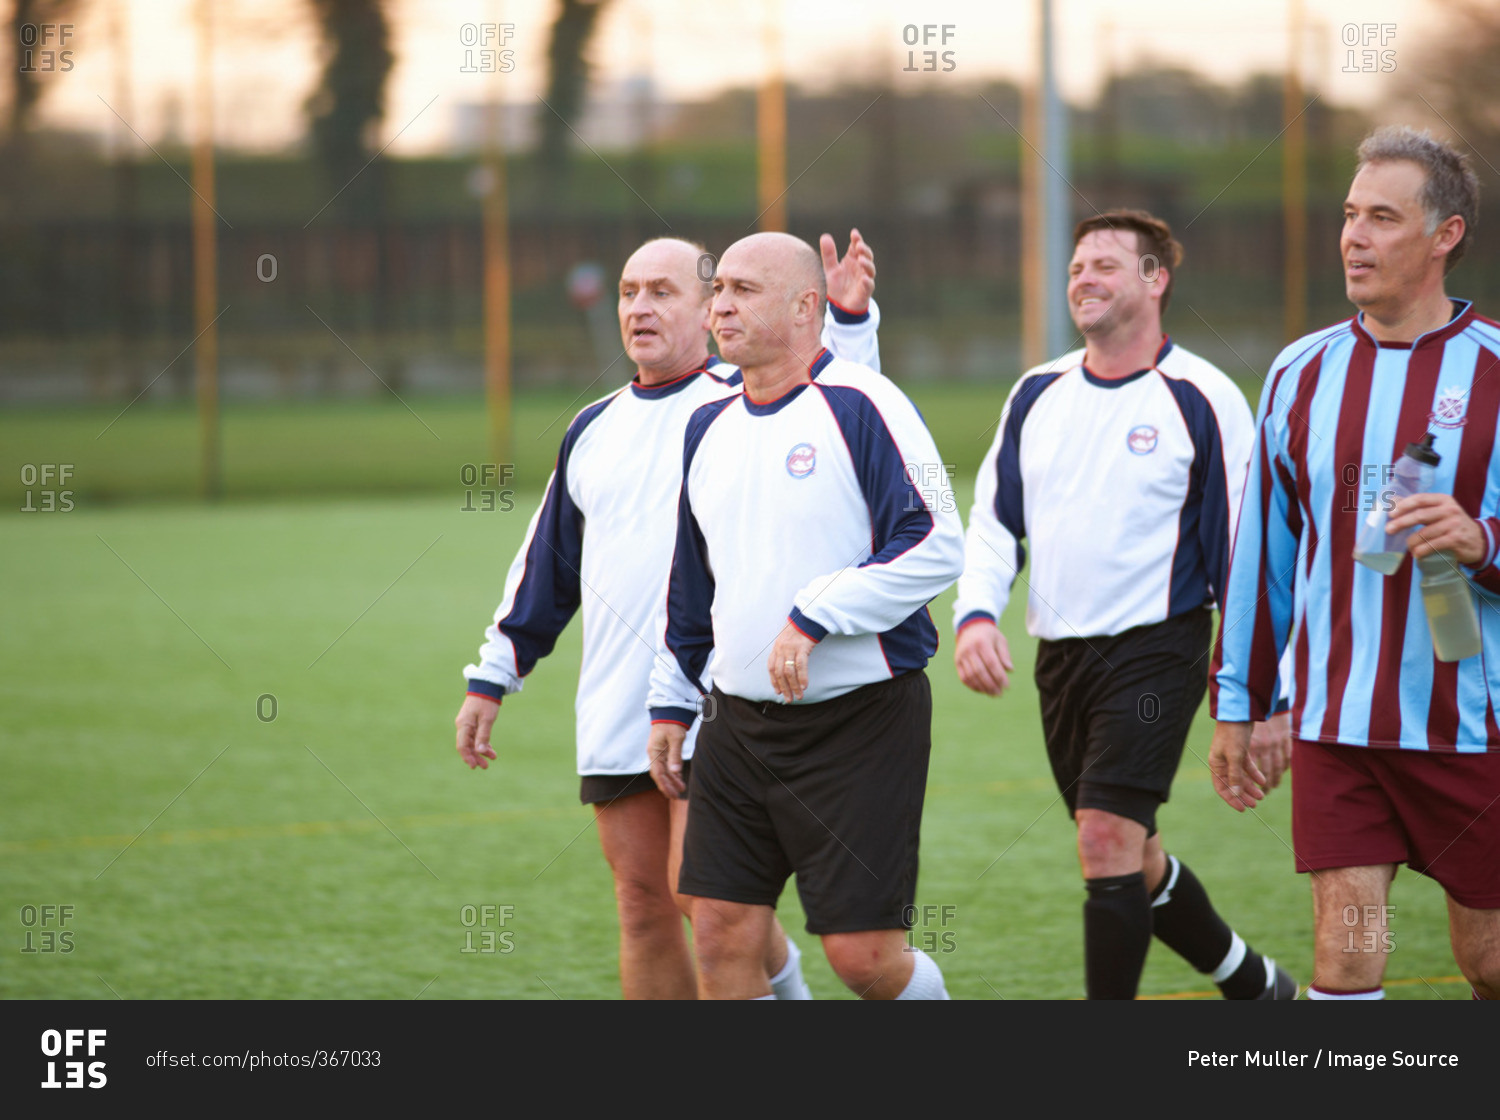 Soccer players at end of game